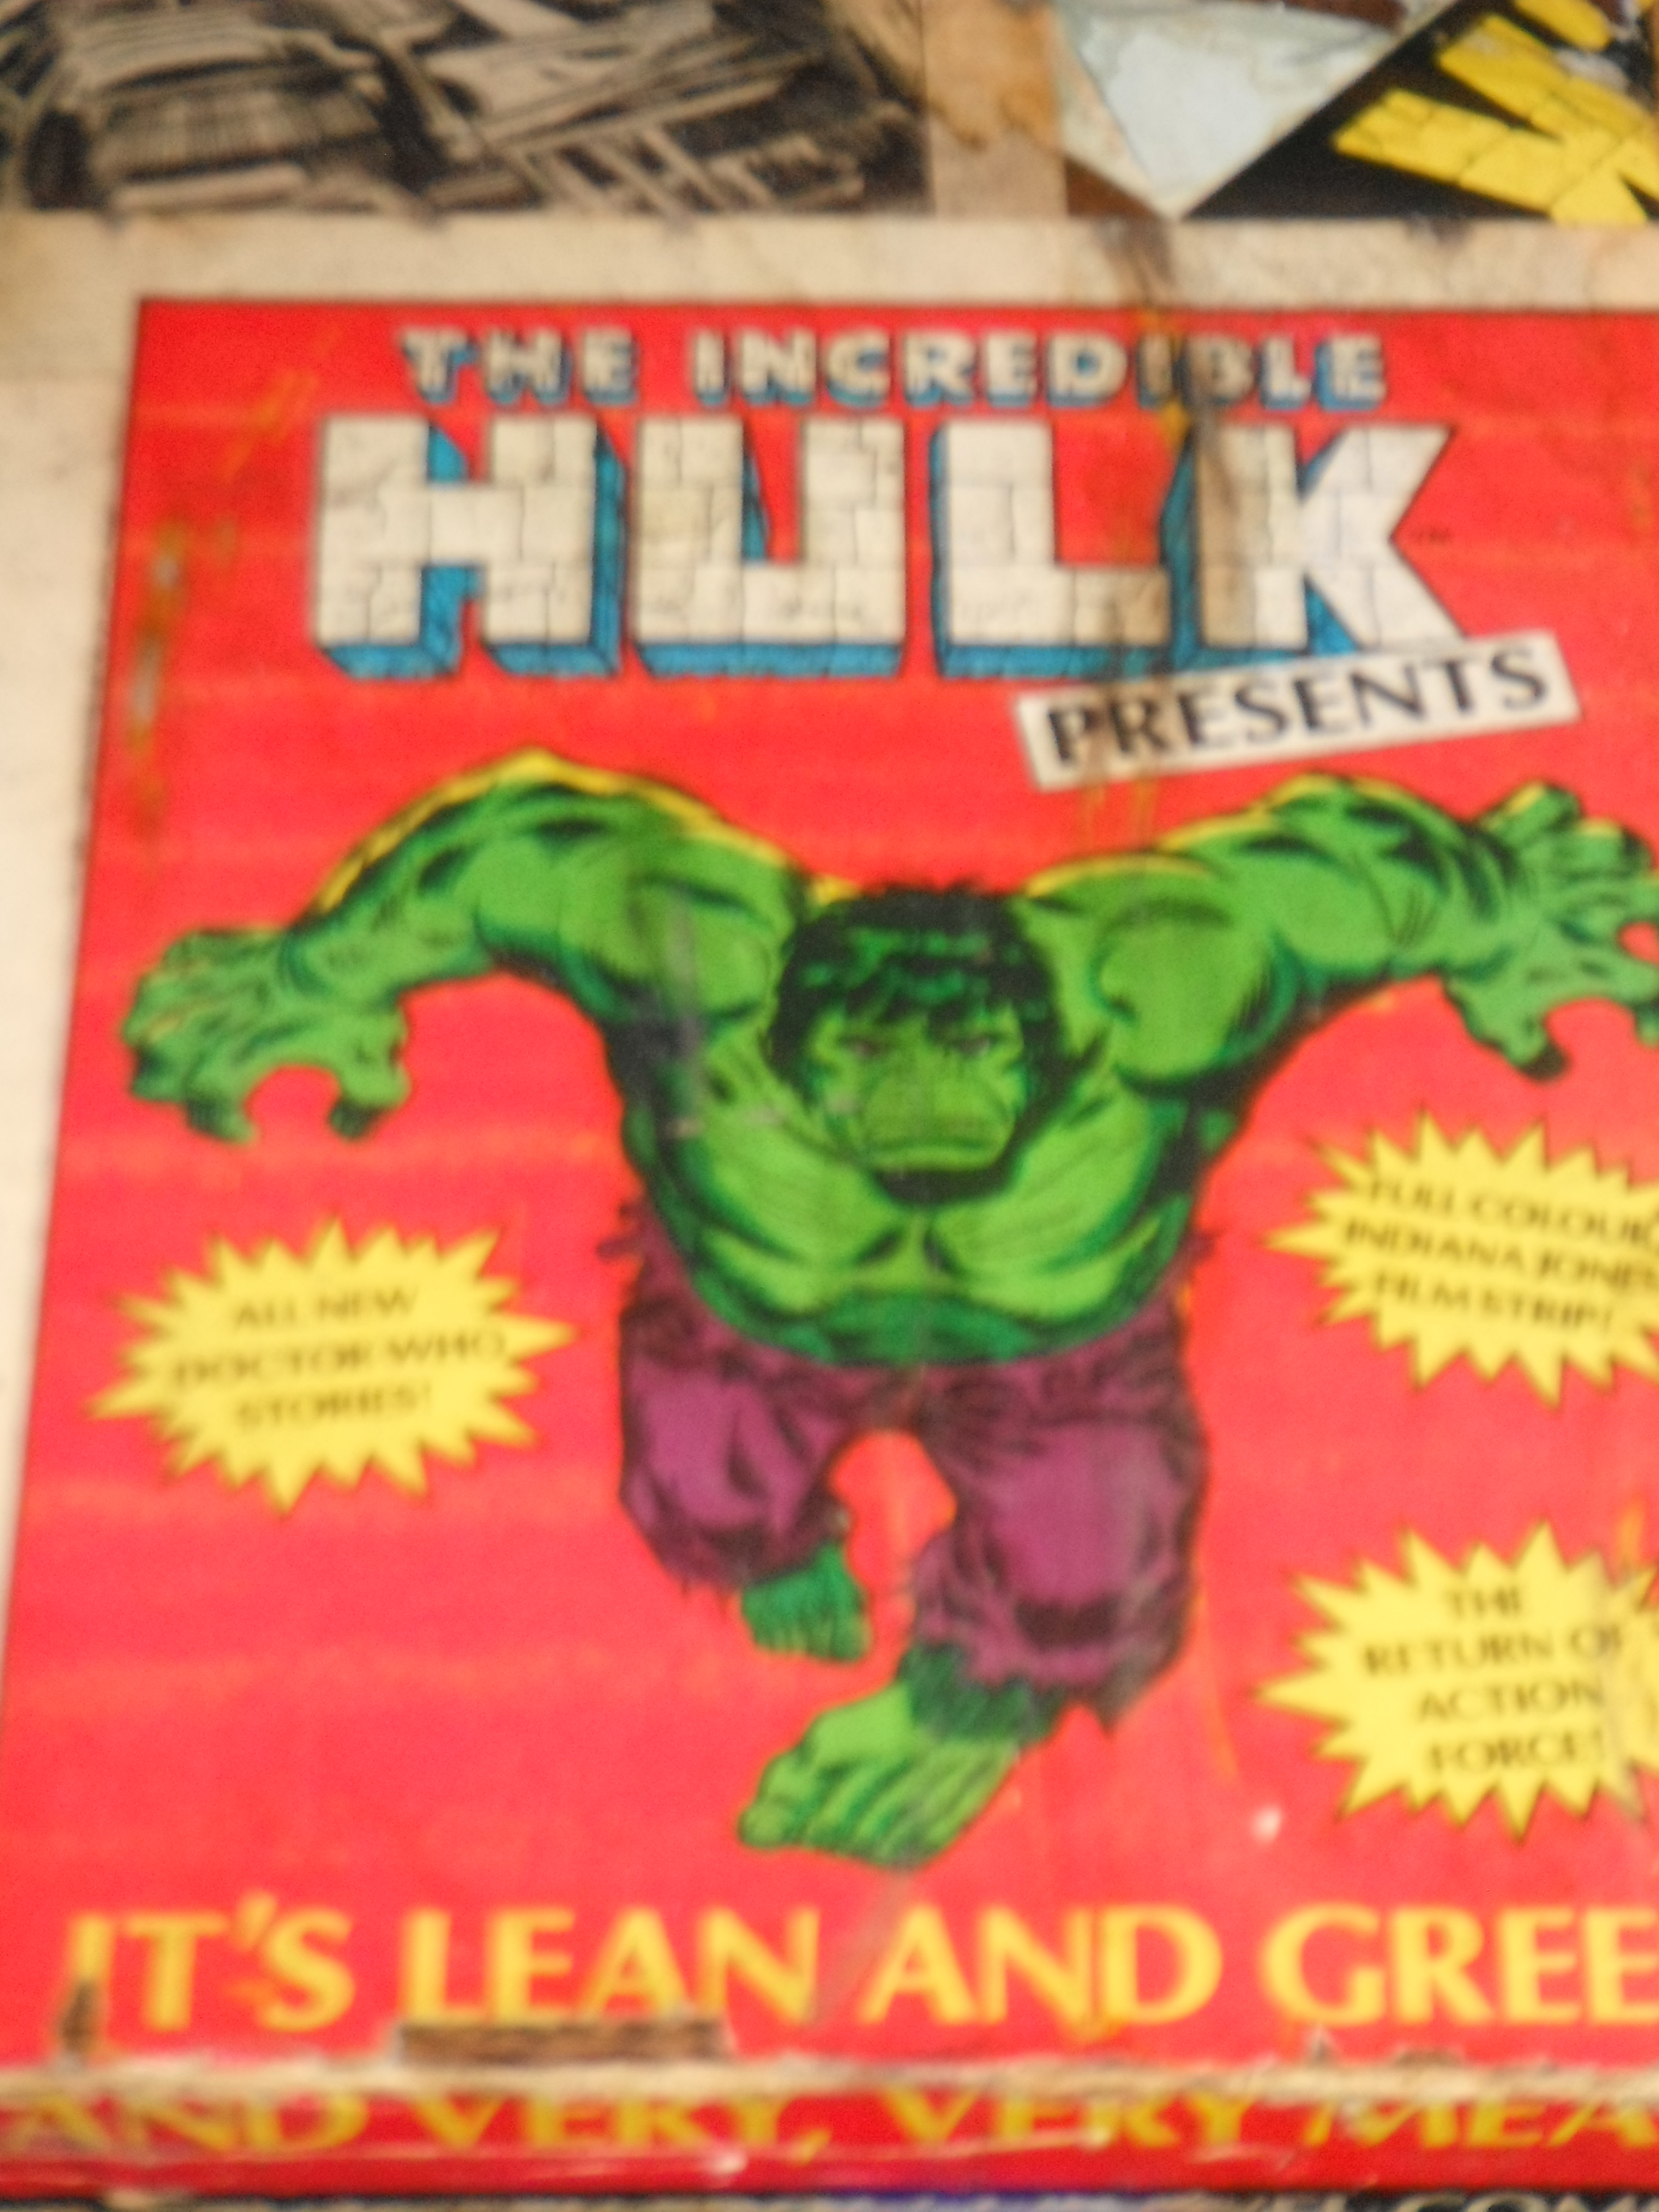 photo taken by me - Hulk comic cover - FAB Cafe, Manchester